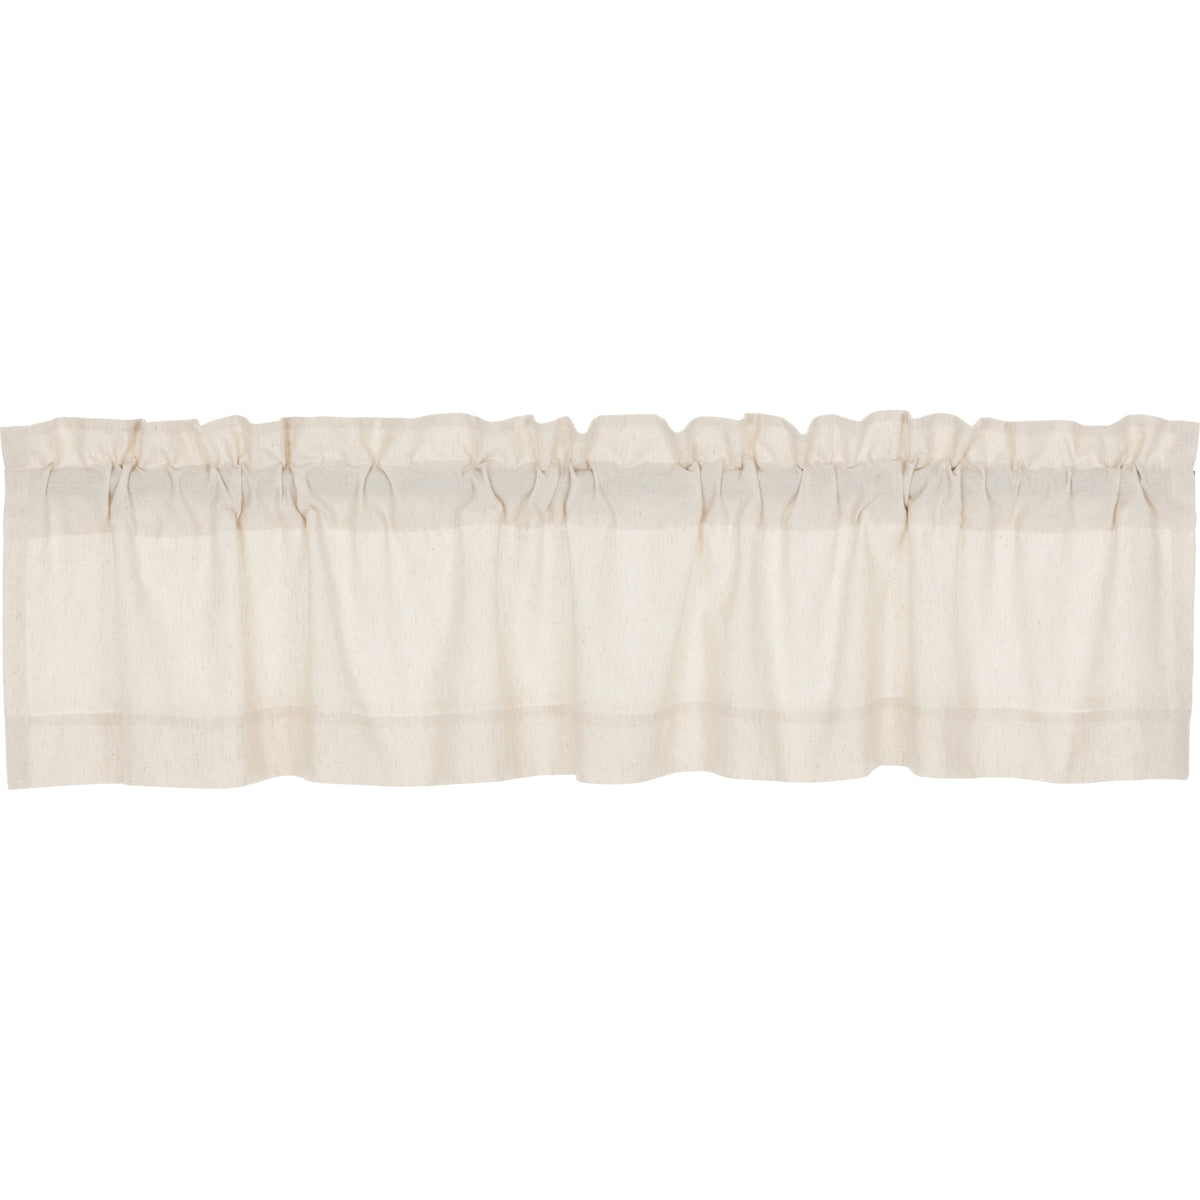 45638-Simple-Life-Flax-Natural-Valance-16x72-image-6